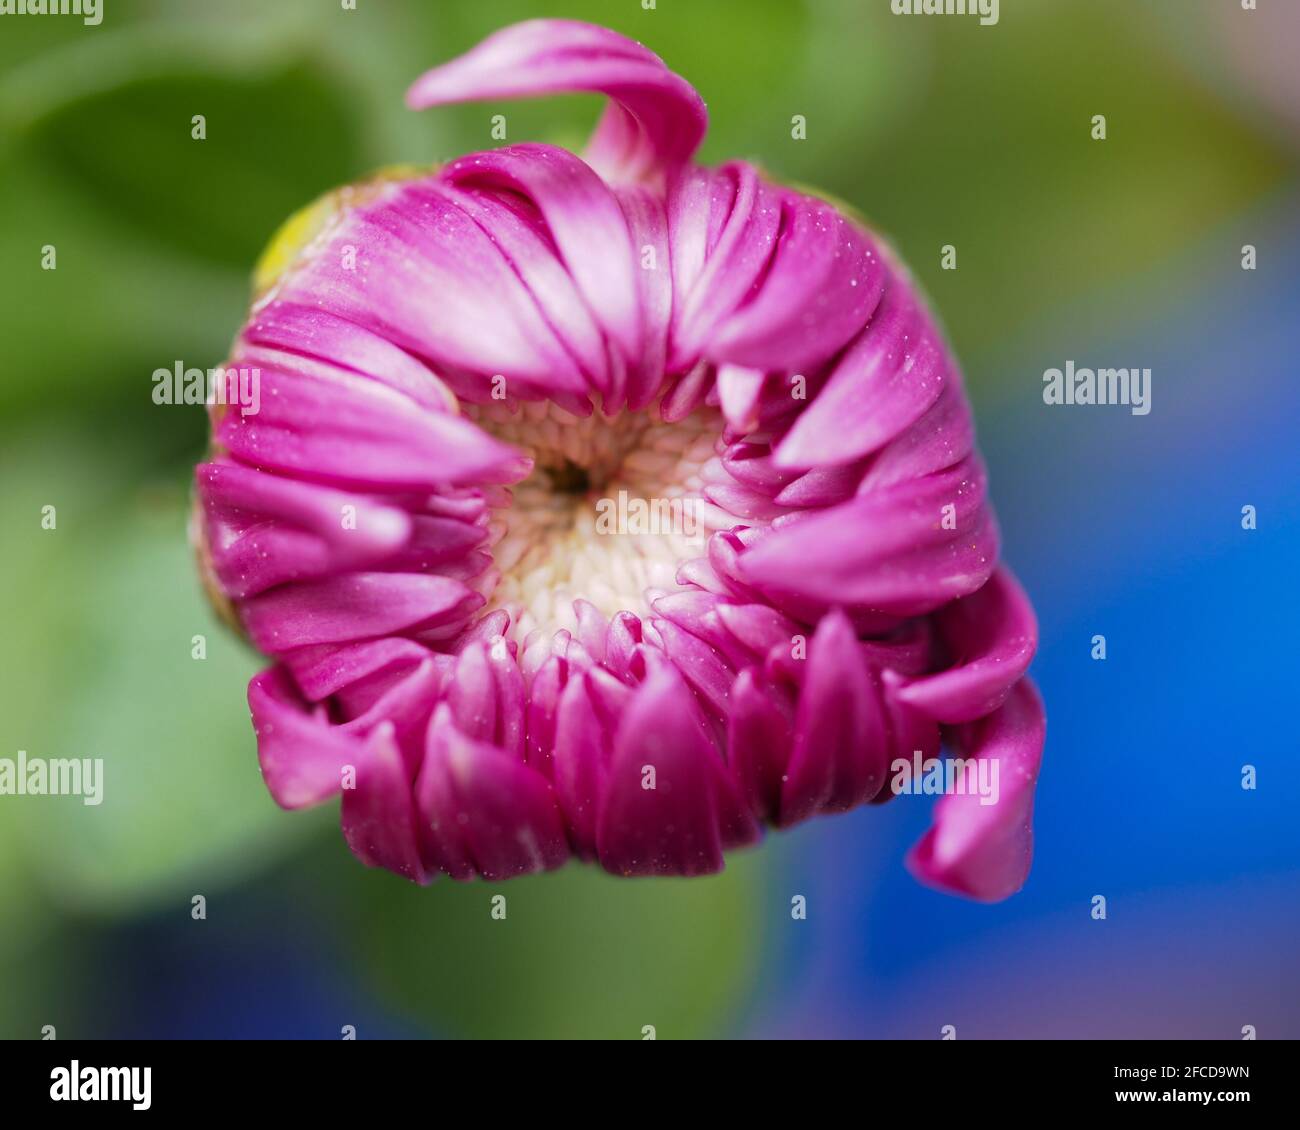 Flower Macro, Pink Chrysanthemum bud opening, on a blurred green and blue background. New inner petals still white Stock Photo